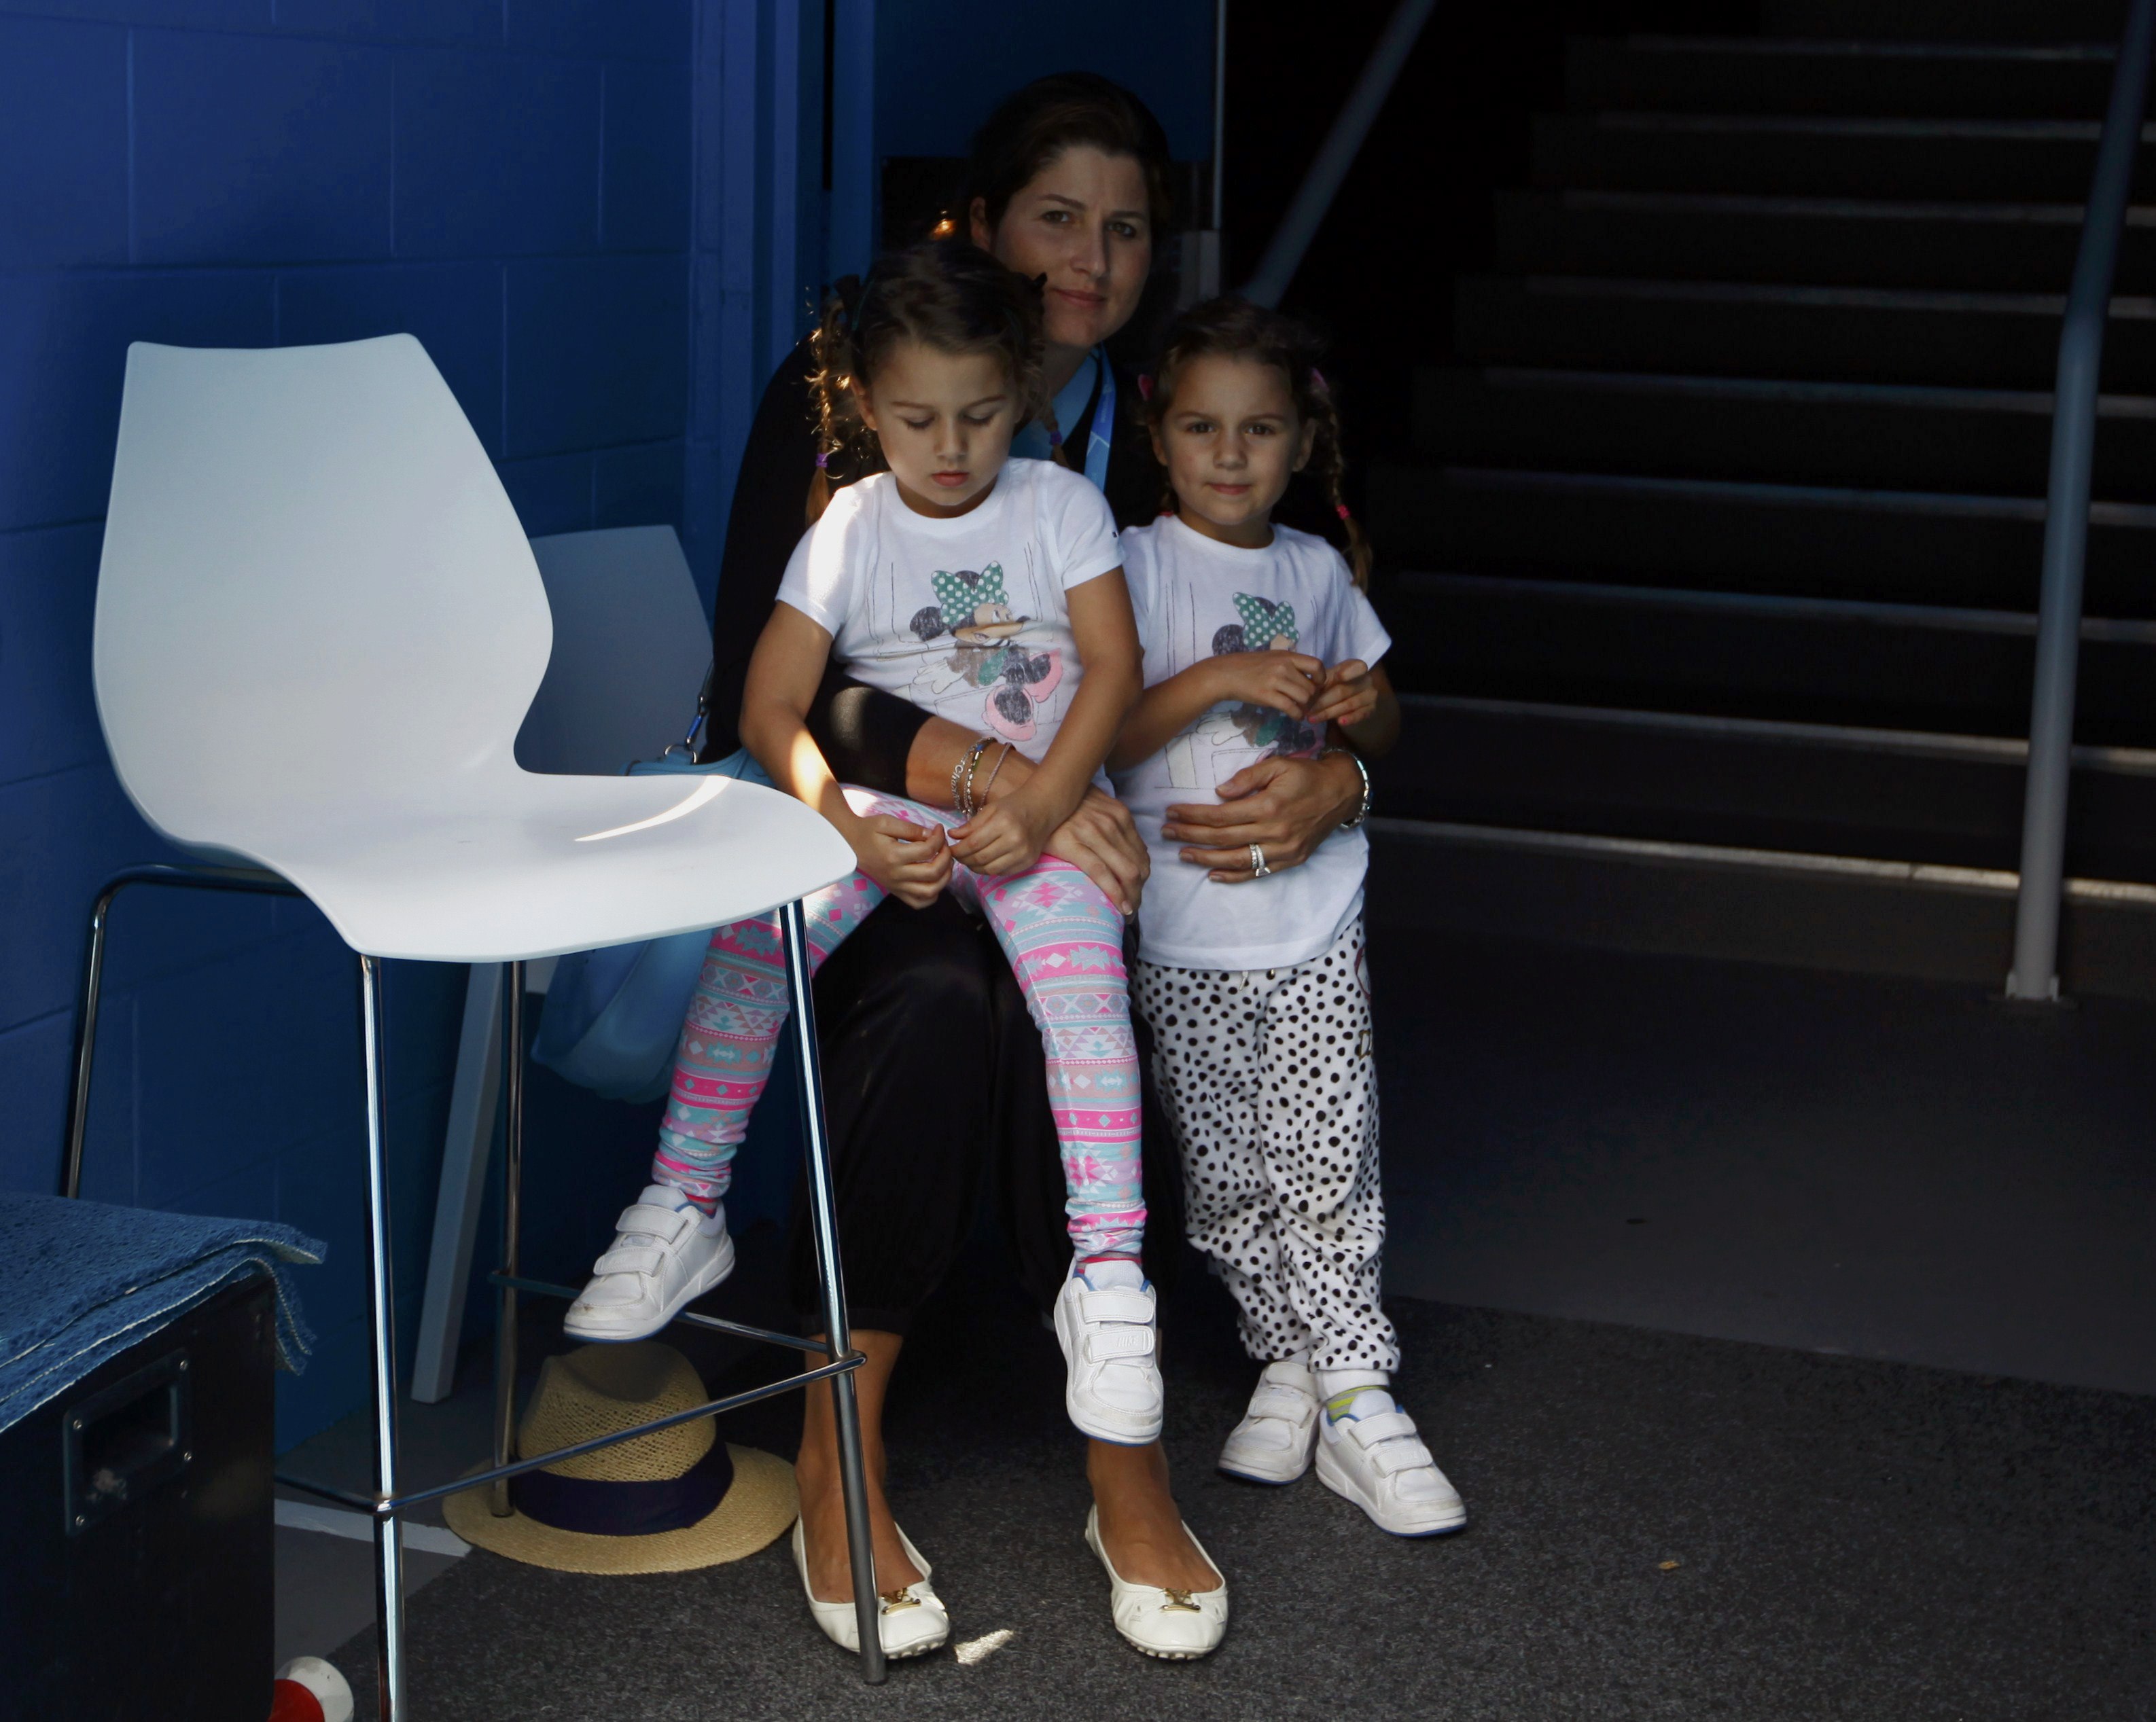 Mirka and the four-year-old Federer twins wait at the Australian Open. (Reuters)